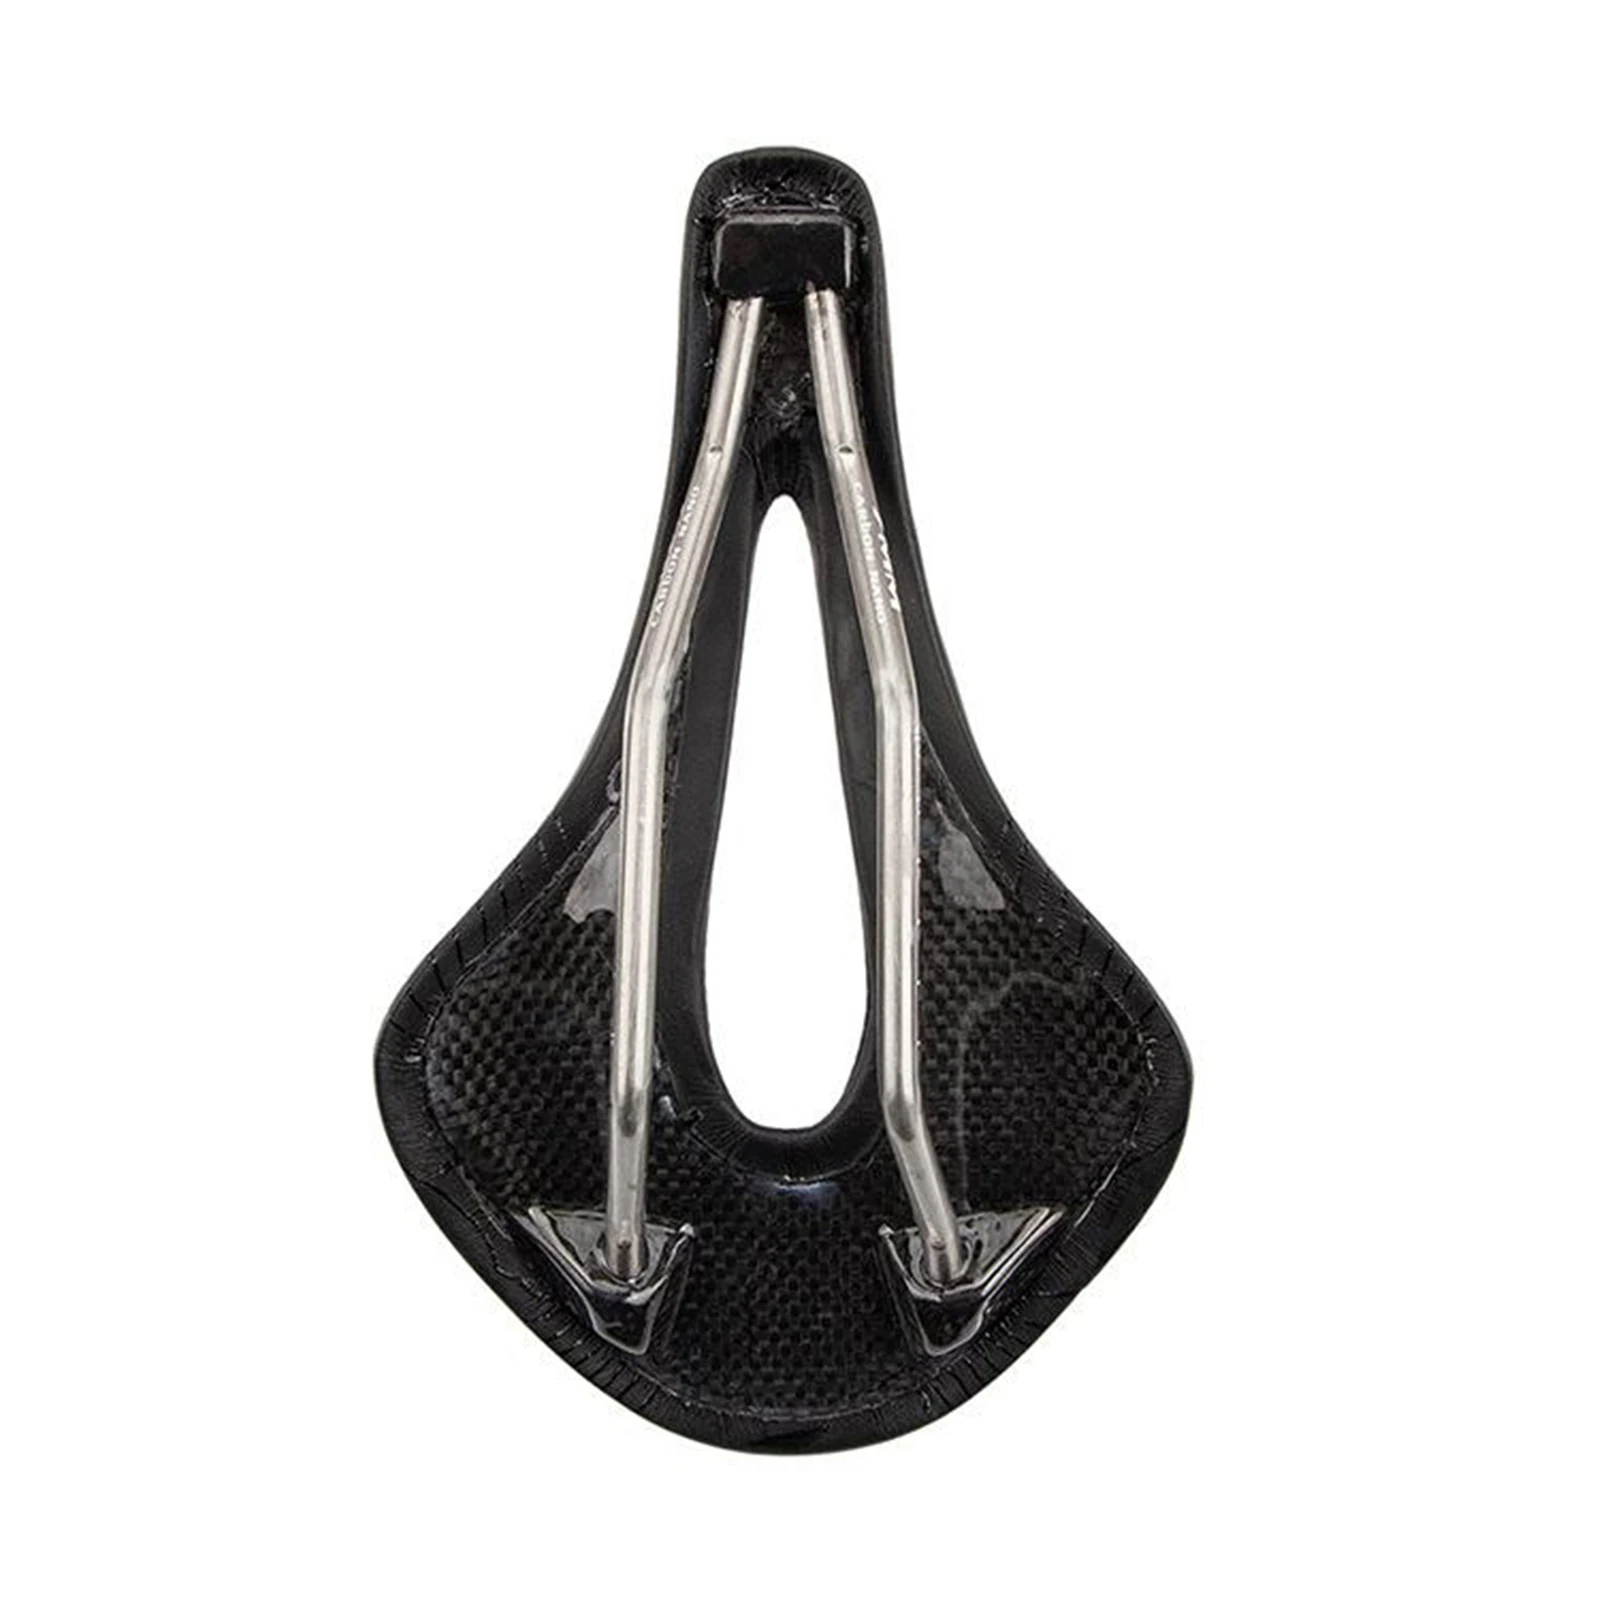 Bike Hollow Seat Replacement Breathable Road Bicycle Carbon Fiber Saddle